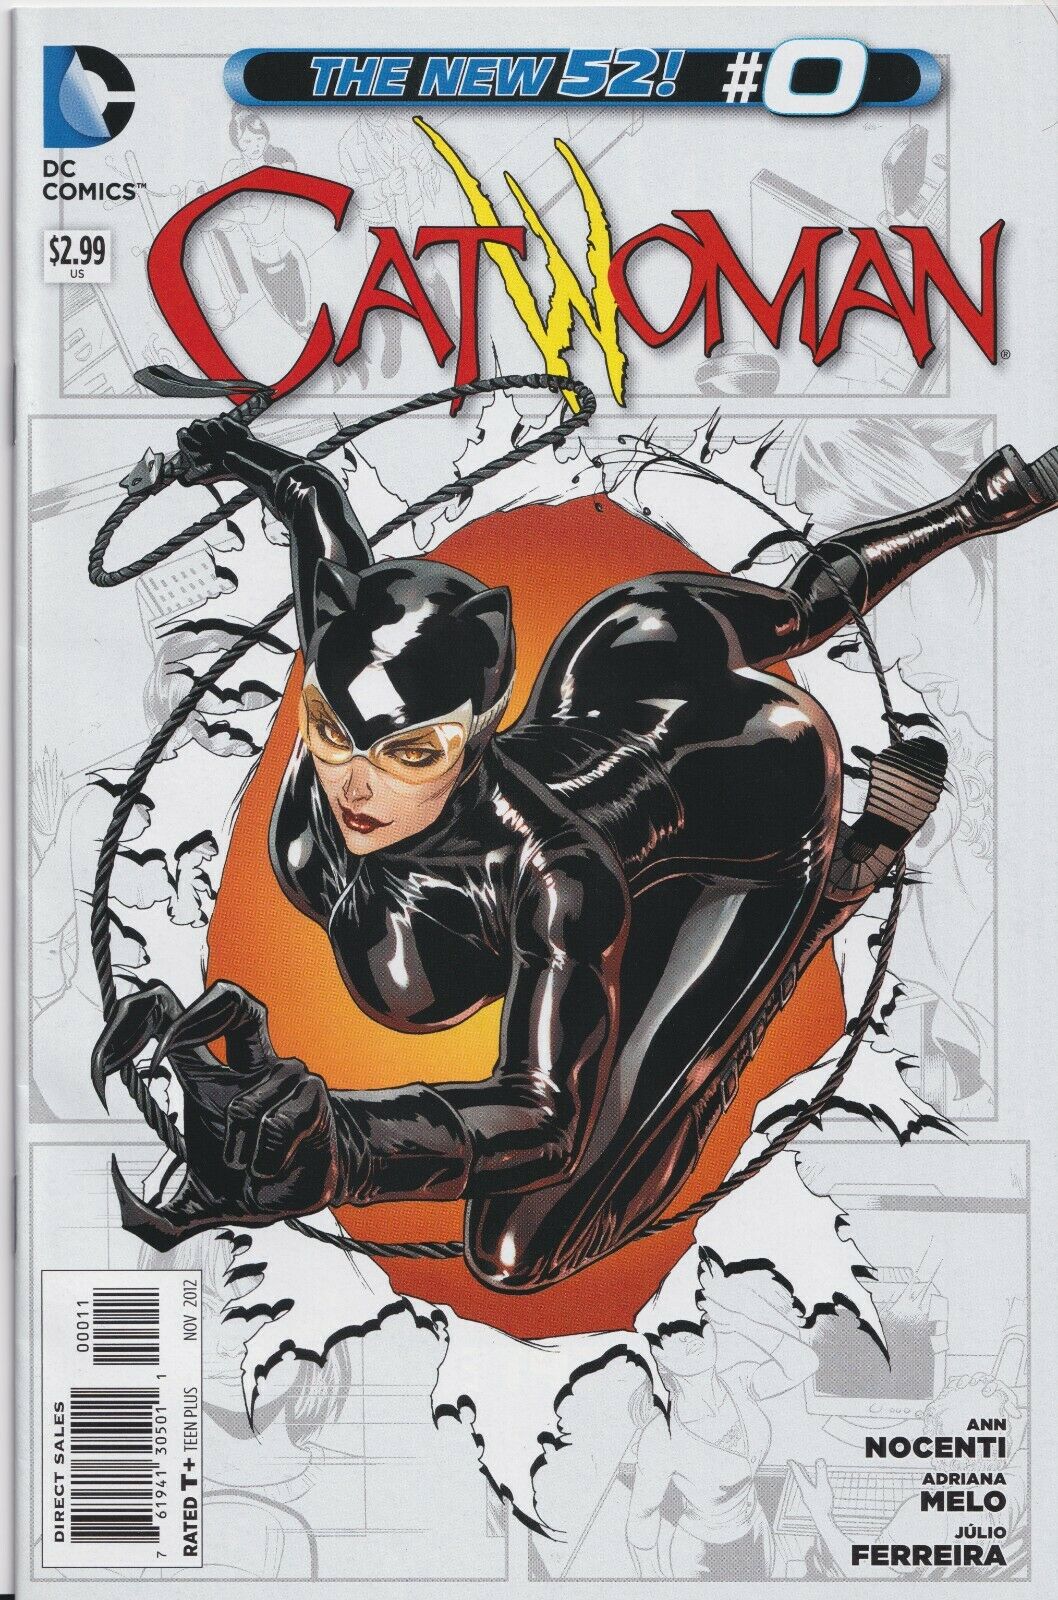 Catwoman #0 (N52) (2011)